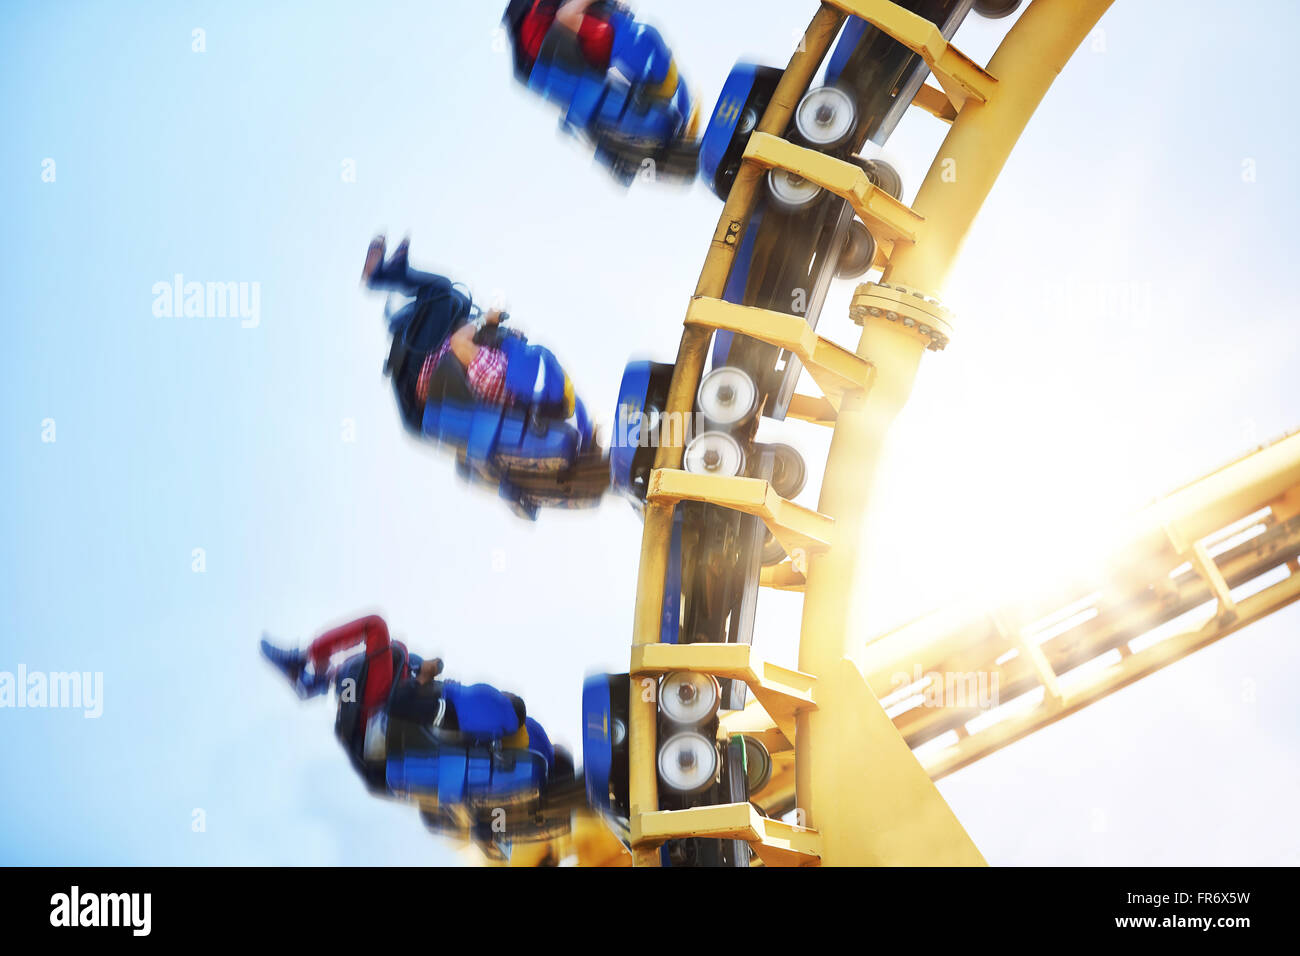 People flipping upside-down on amusement park ride Stock Photo